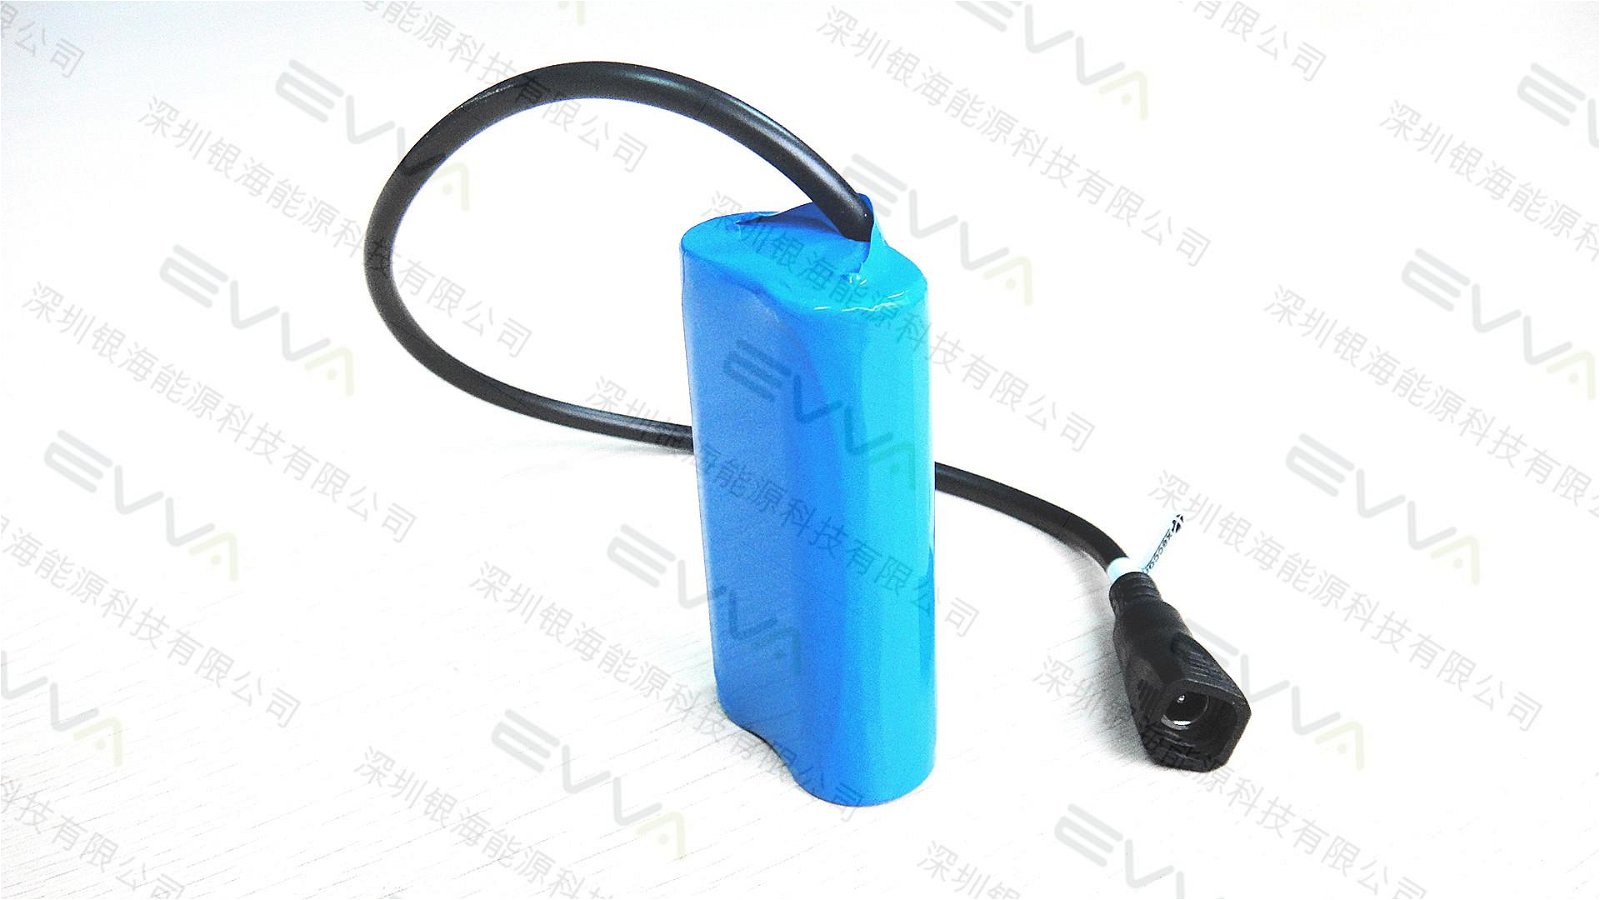 2S1P 26650 186560 21700 14500 553450 103450 BATTERY PACK CELL BATTERIES